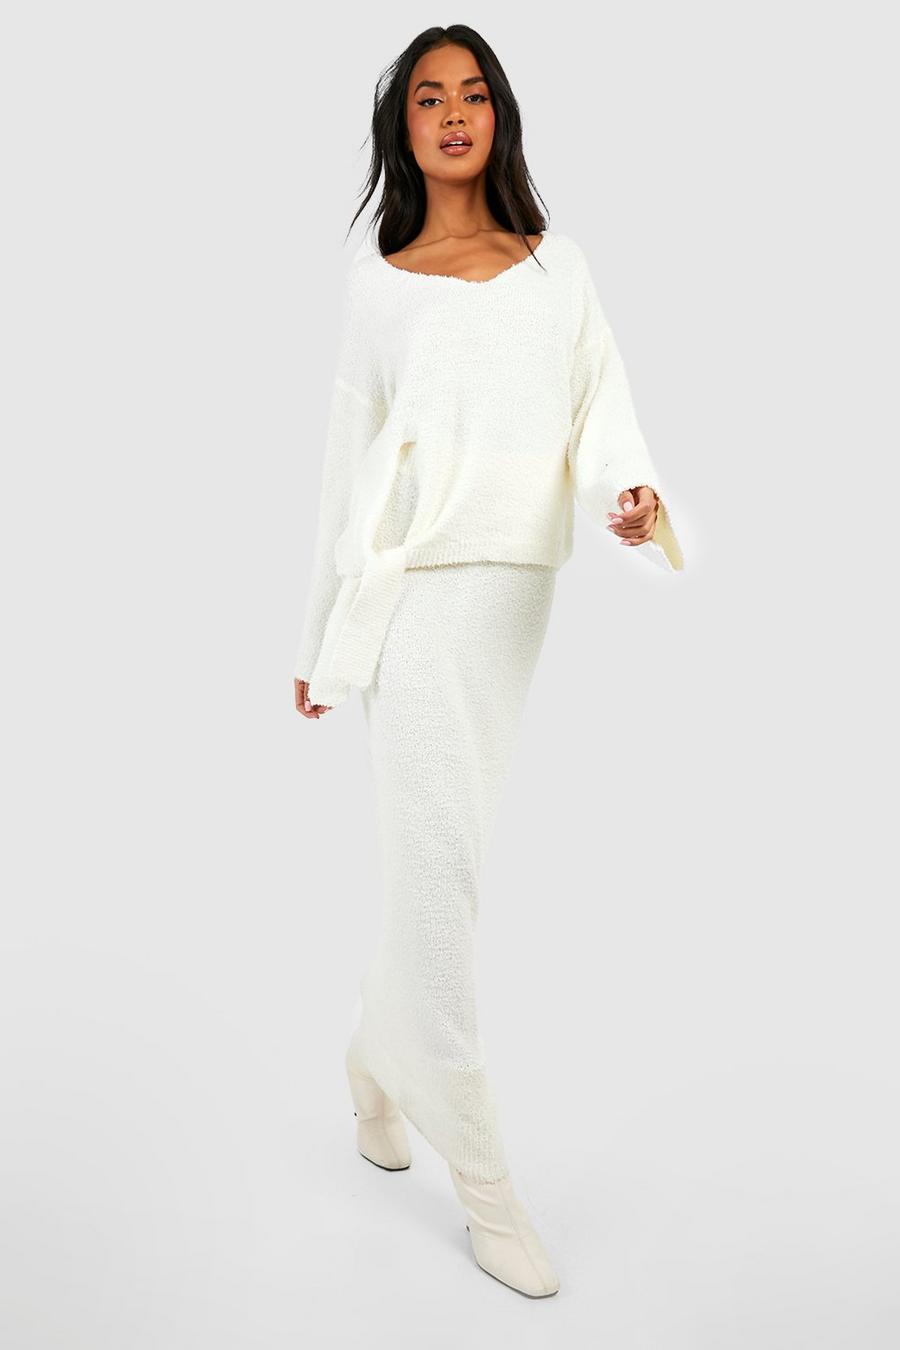 Ivory white Premum Textured Slouchy Knit Jumper And Maxi Skirt Co-ord